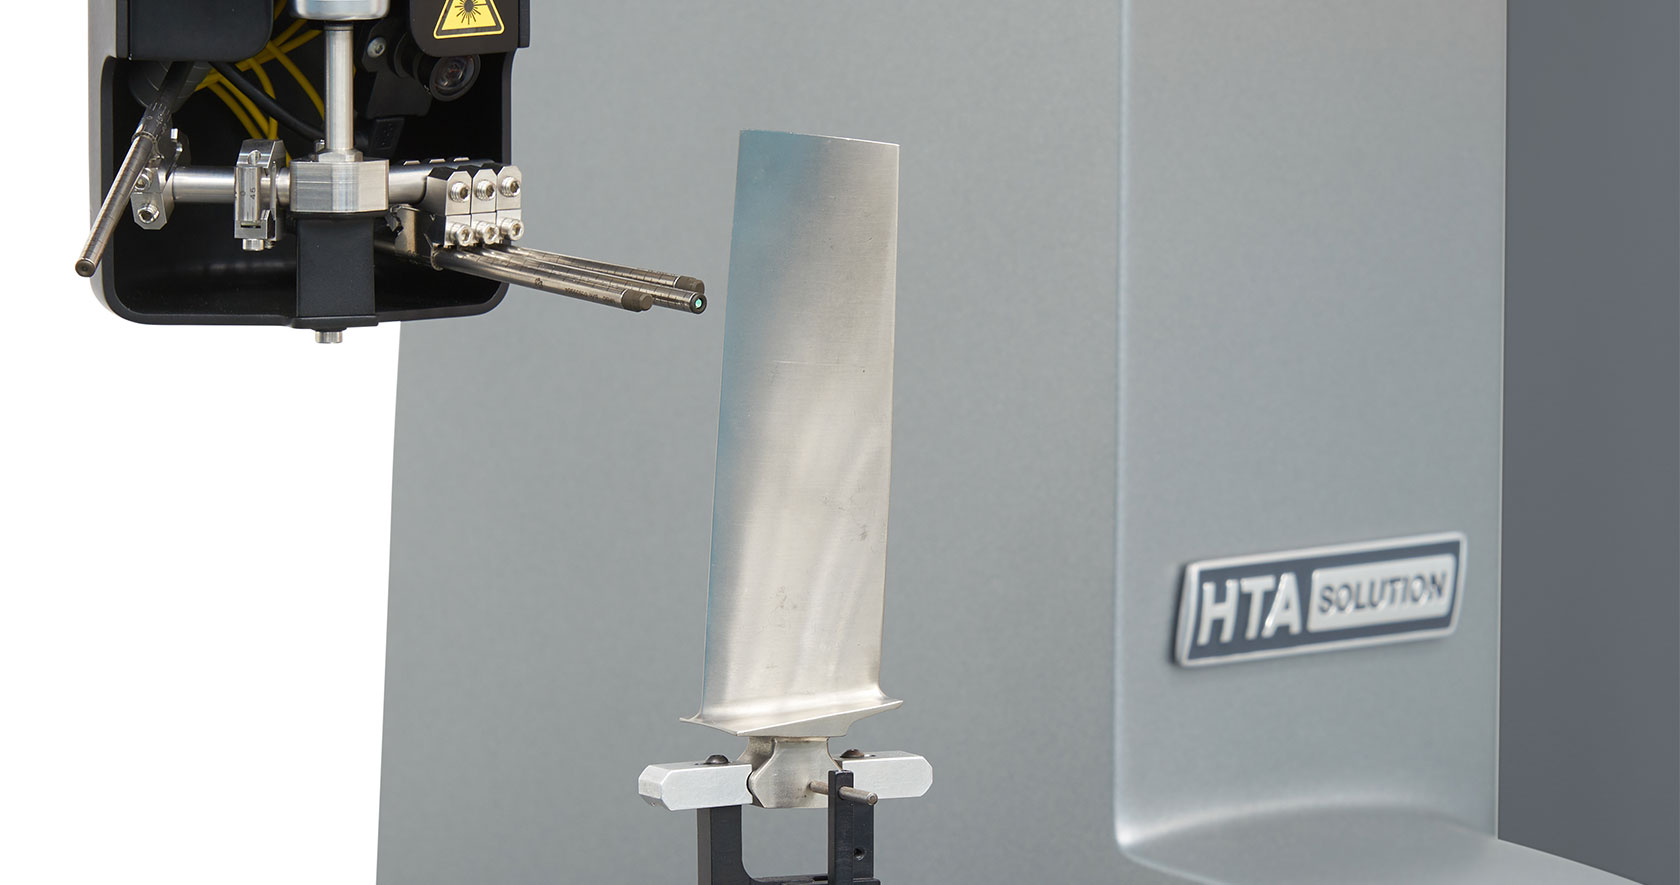 The GLOBAL S HTA solution combines speed with the accuracy expected from Hexagon Manufacturing Intelligence when performing blade inspection